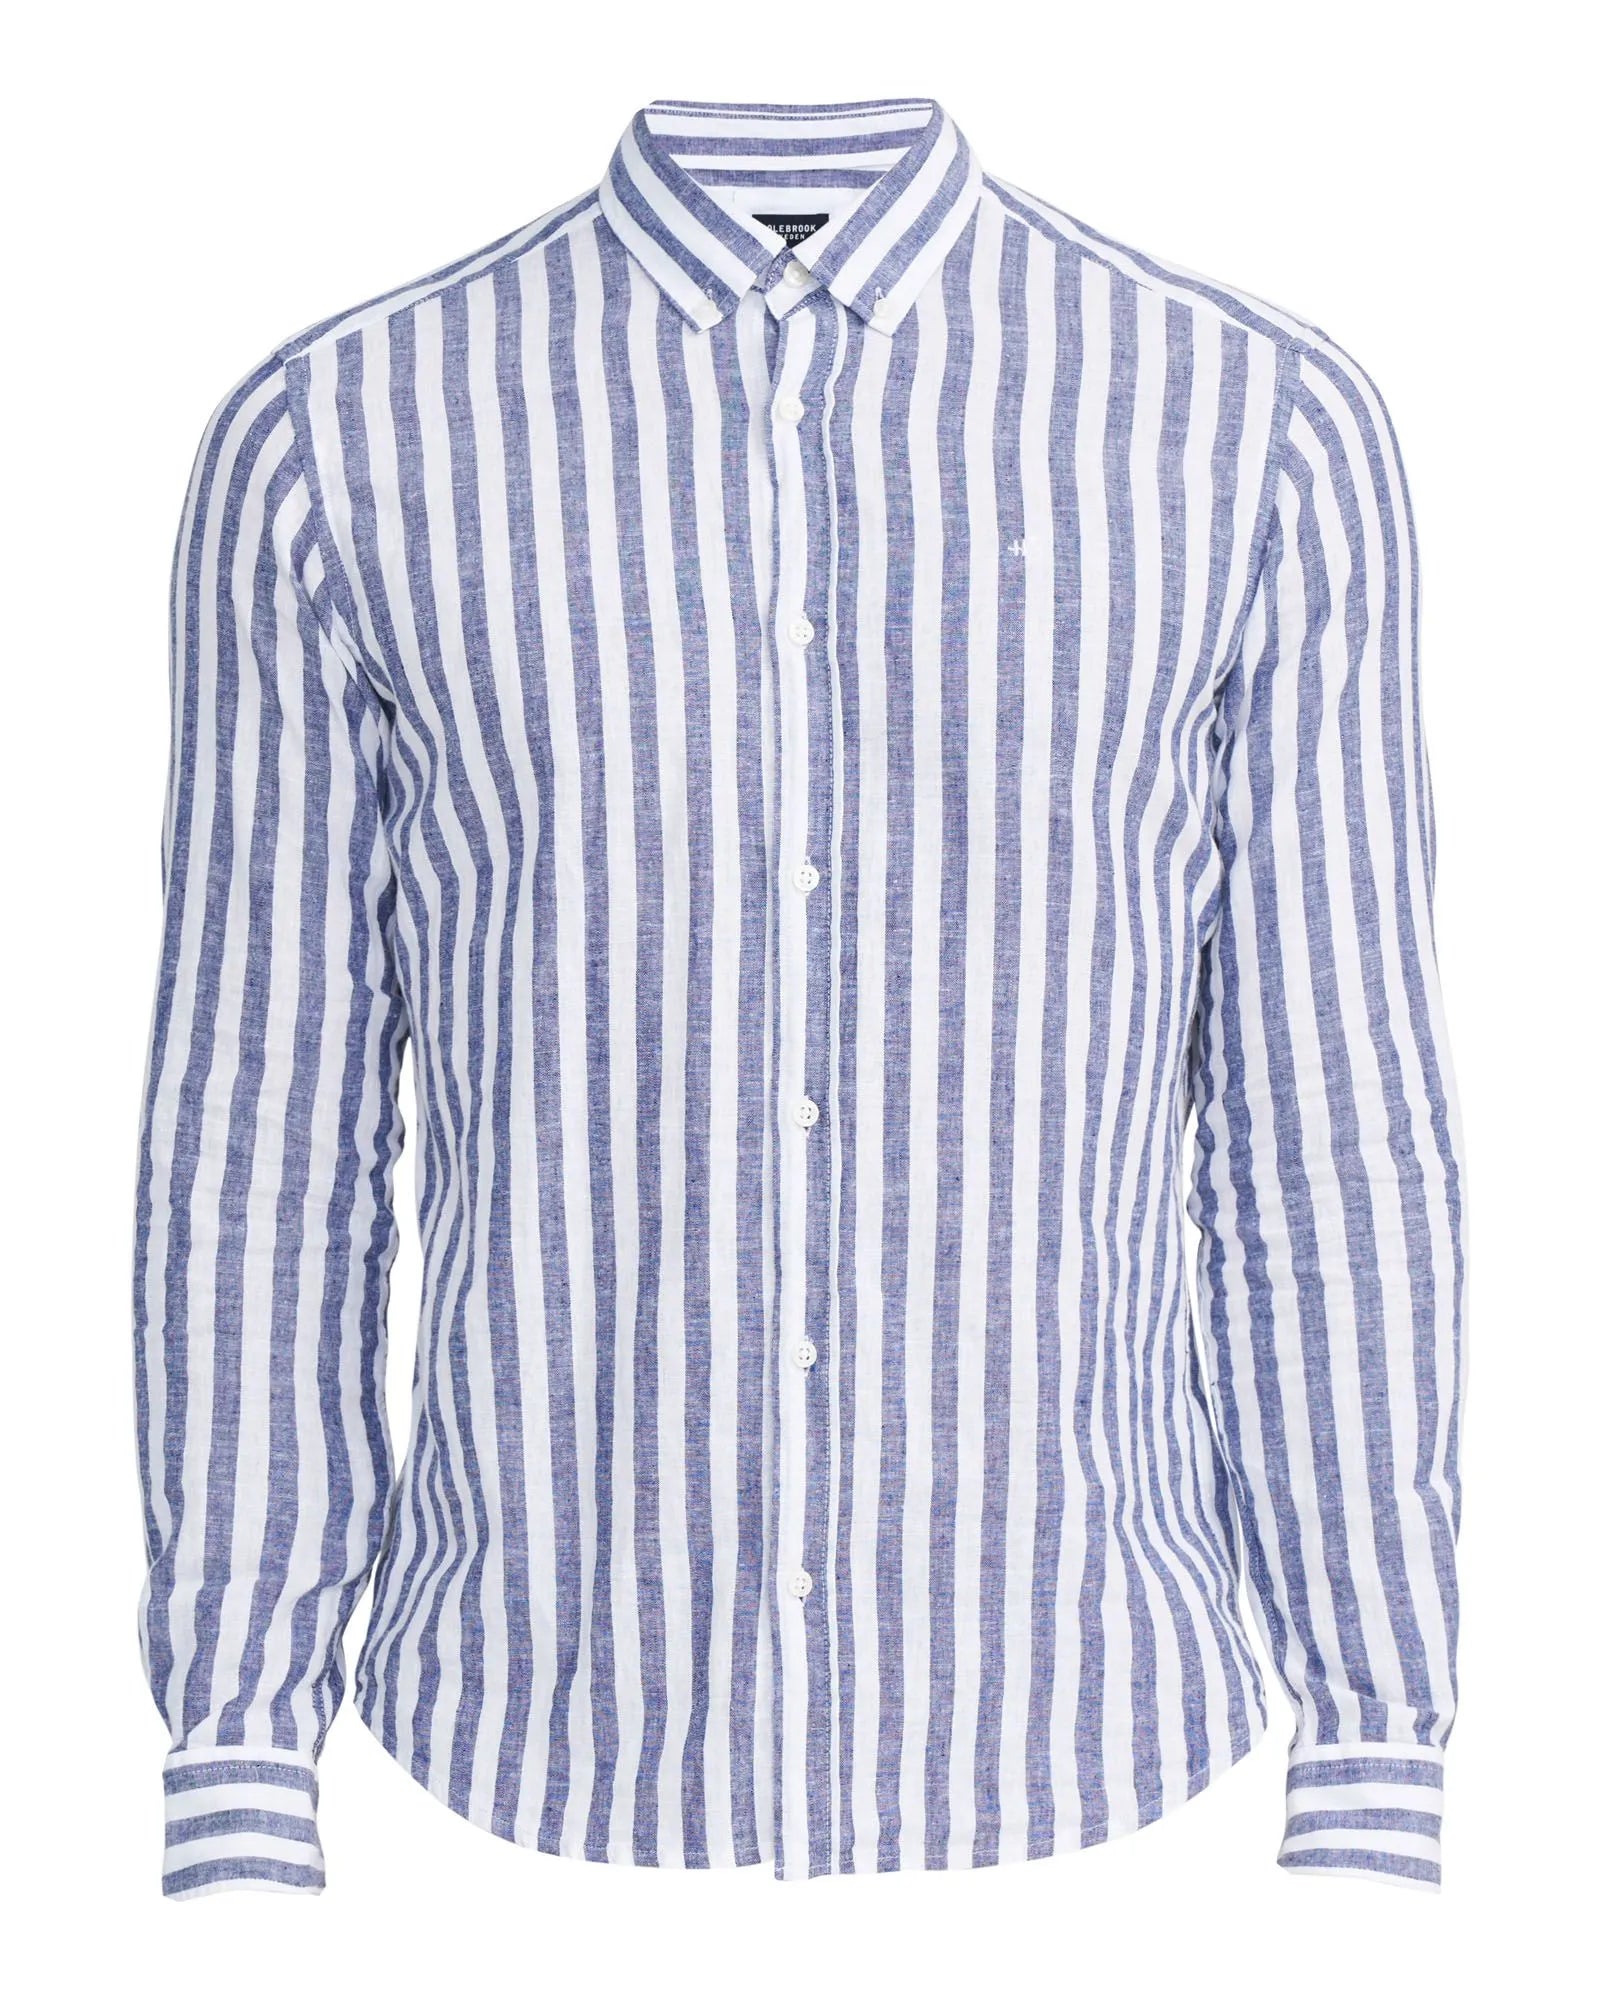 Markus Classic Fit Button Down Shirt - Navy/White